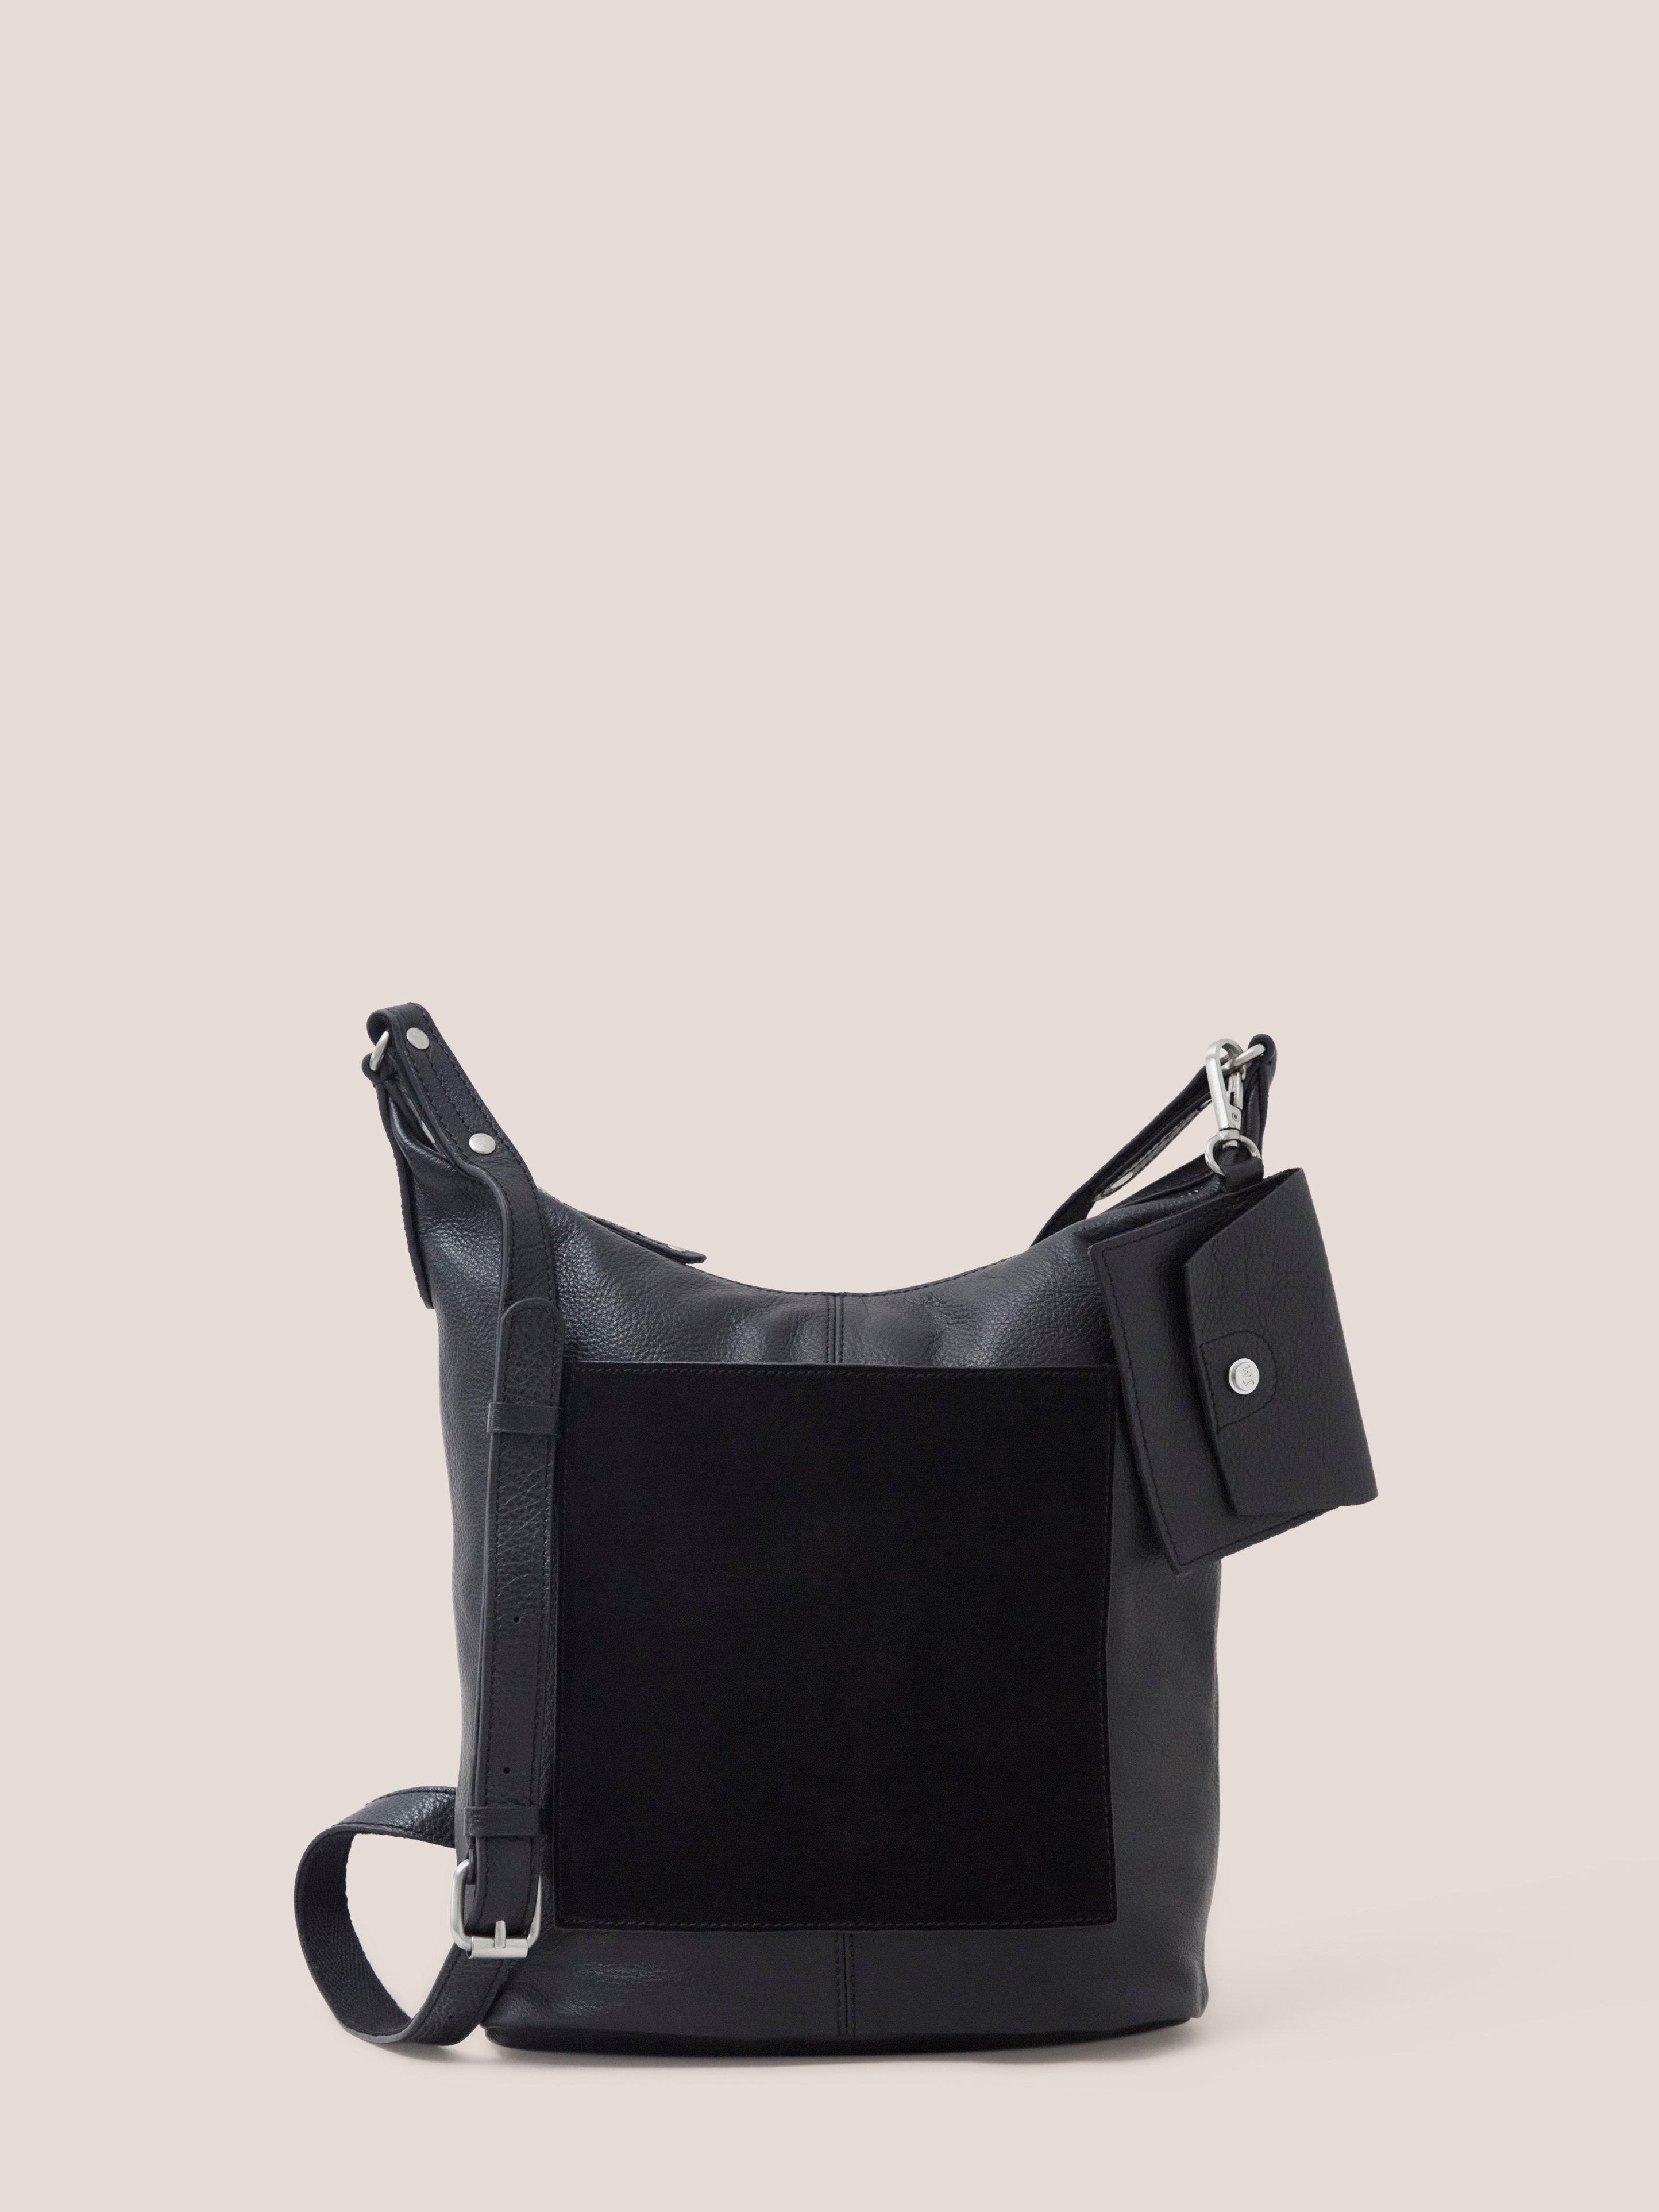 Fern Leather Casual Crossbody Bag in PURE BLK - LIFESTYLE